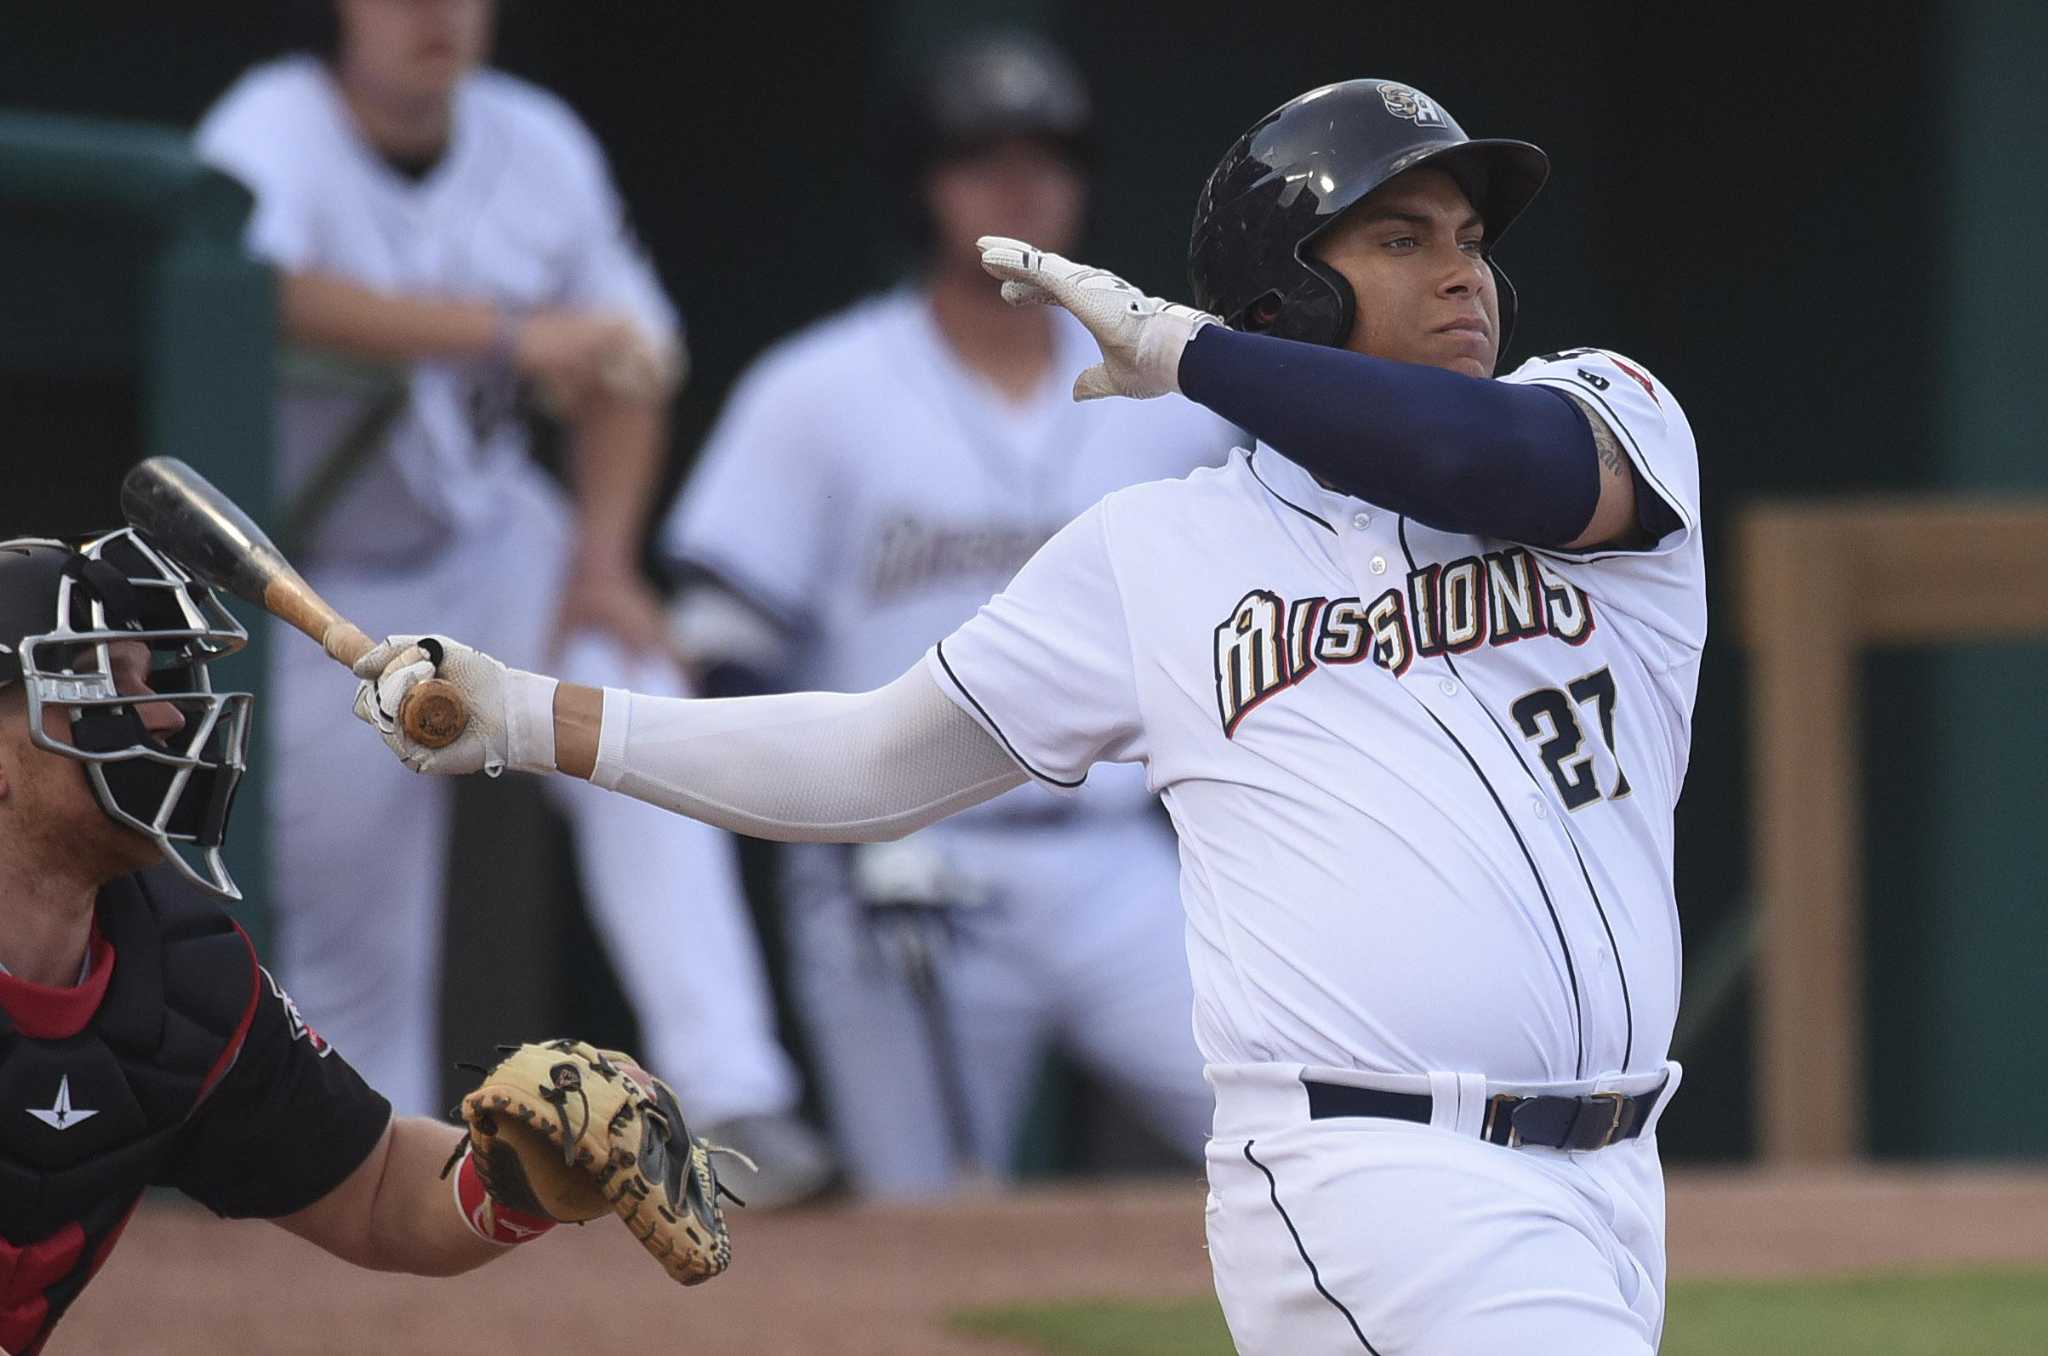 Missions' Josh Naylor used hockey to boost confidence into baseball career